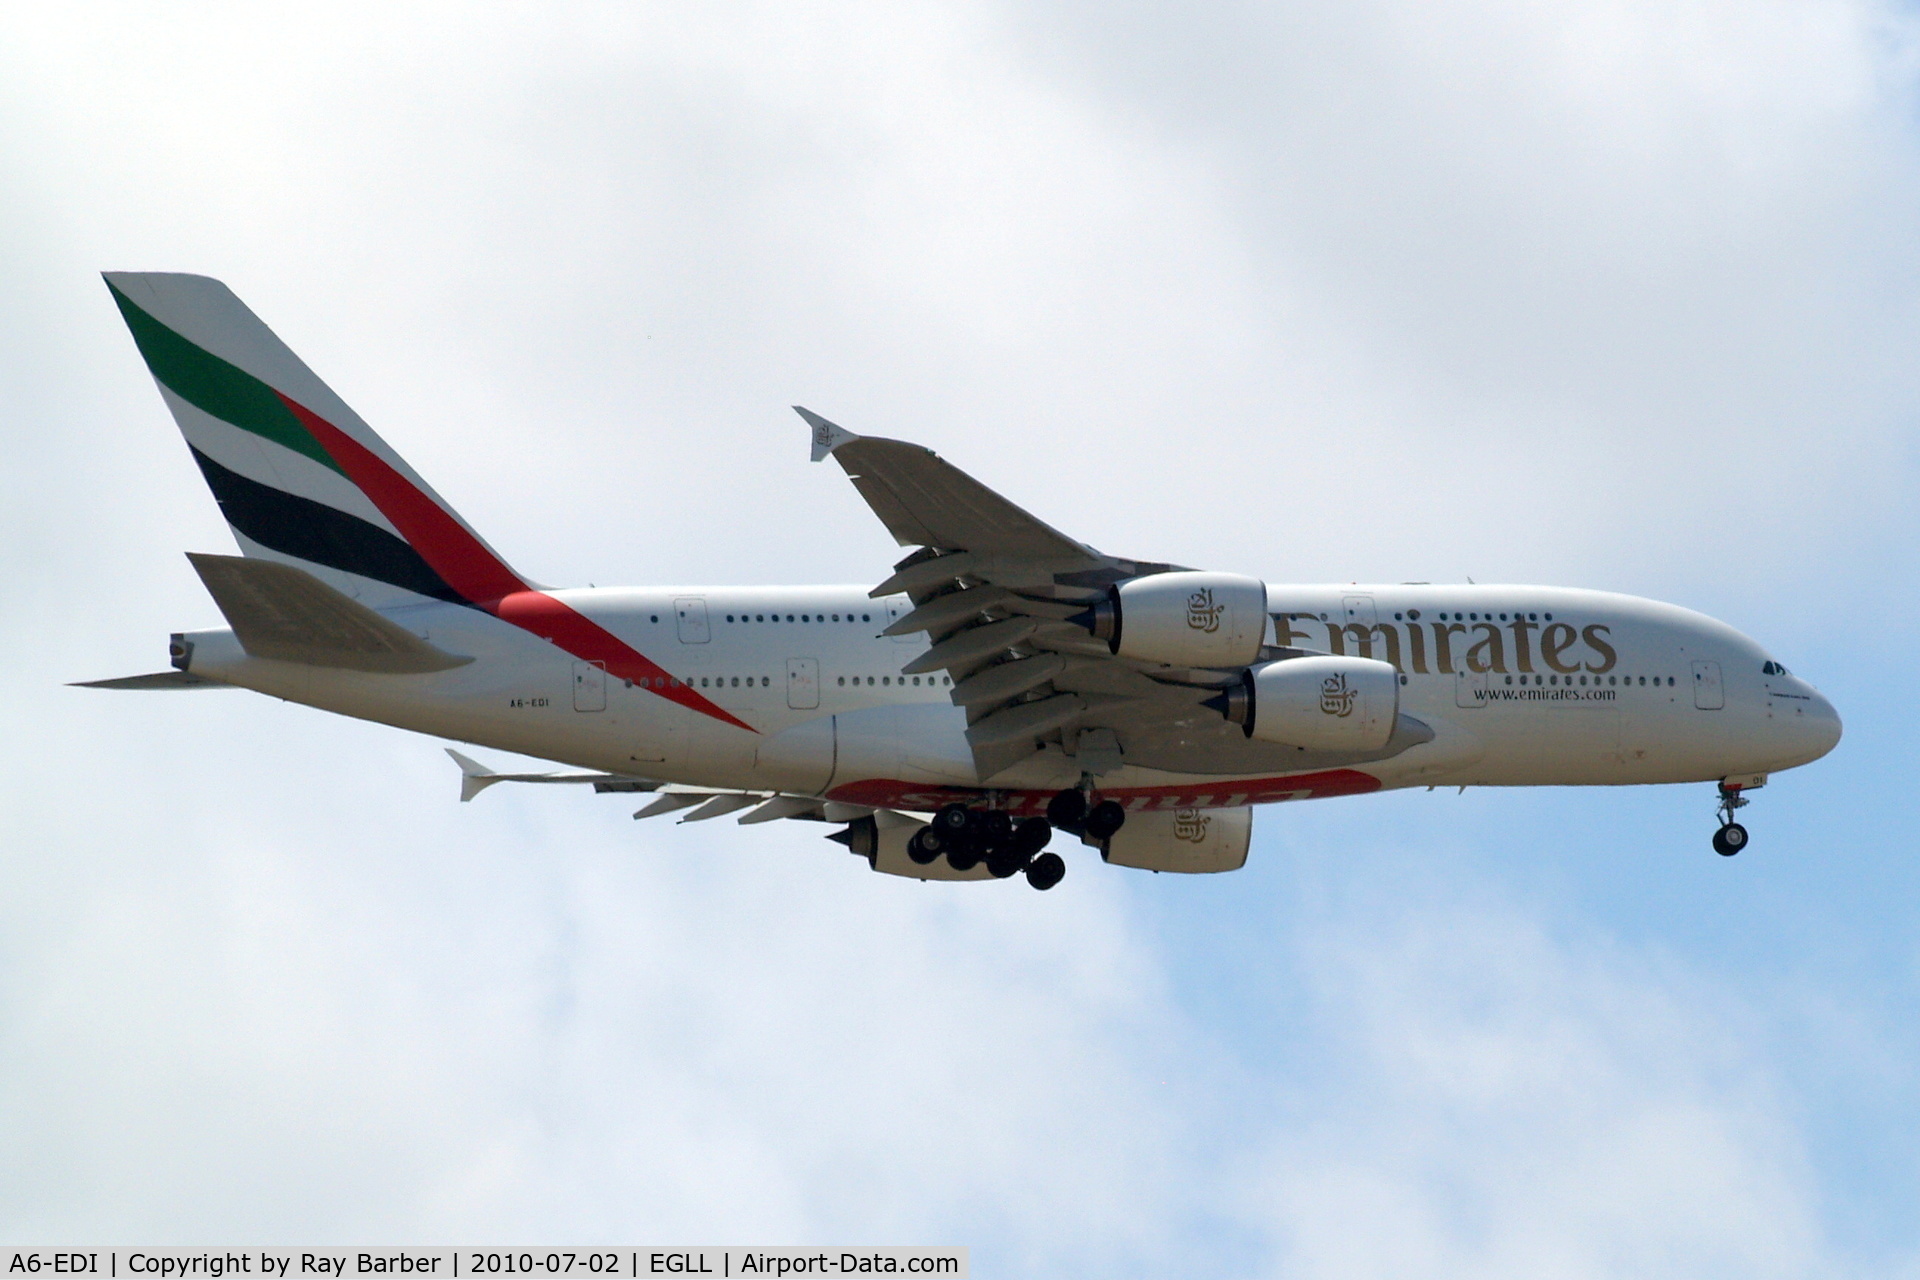 A6-EDI, 2009 Airbus A380-861 C/N 028, Airbus A380-861 [028] (Emirates Airlines) Home~G 02/07/2010. On approach 27L.